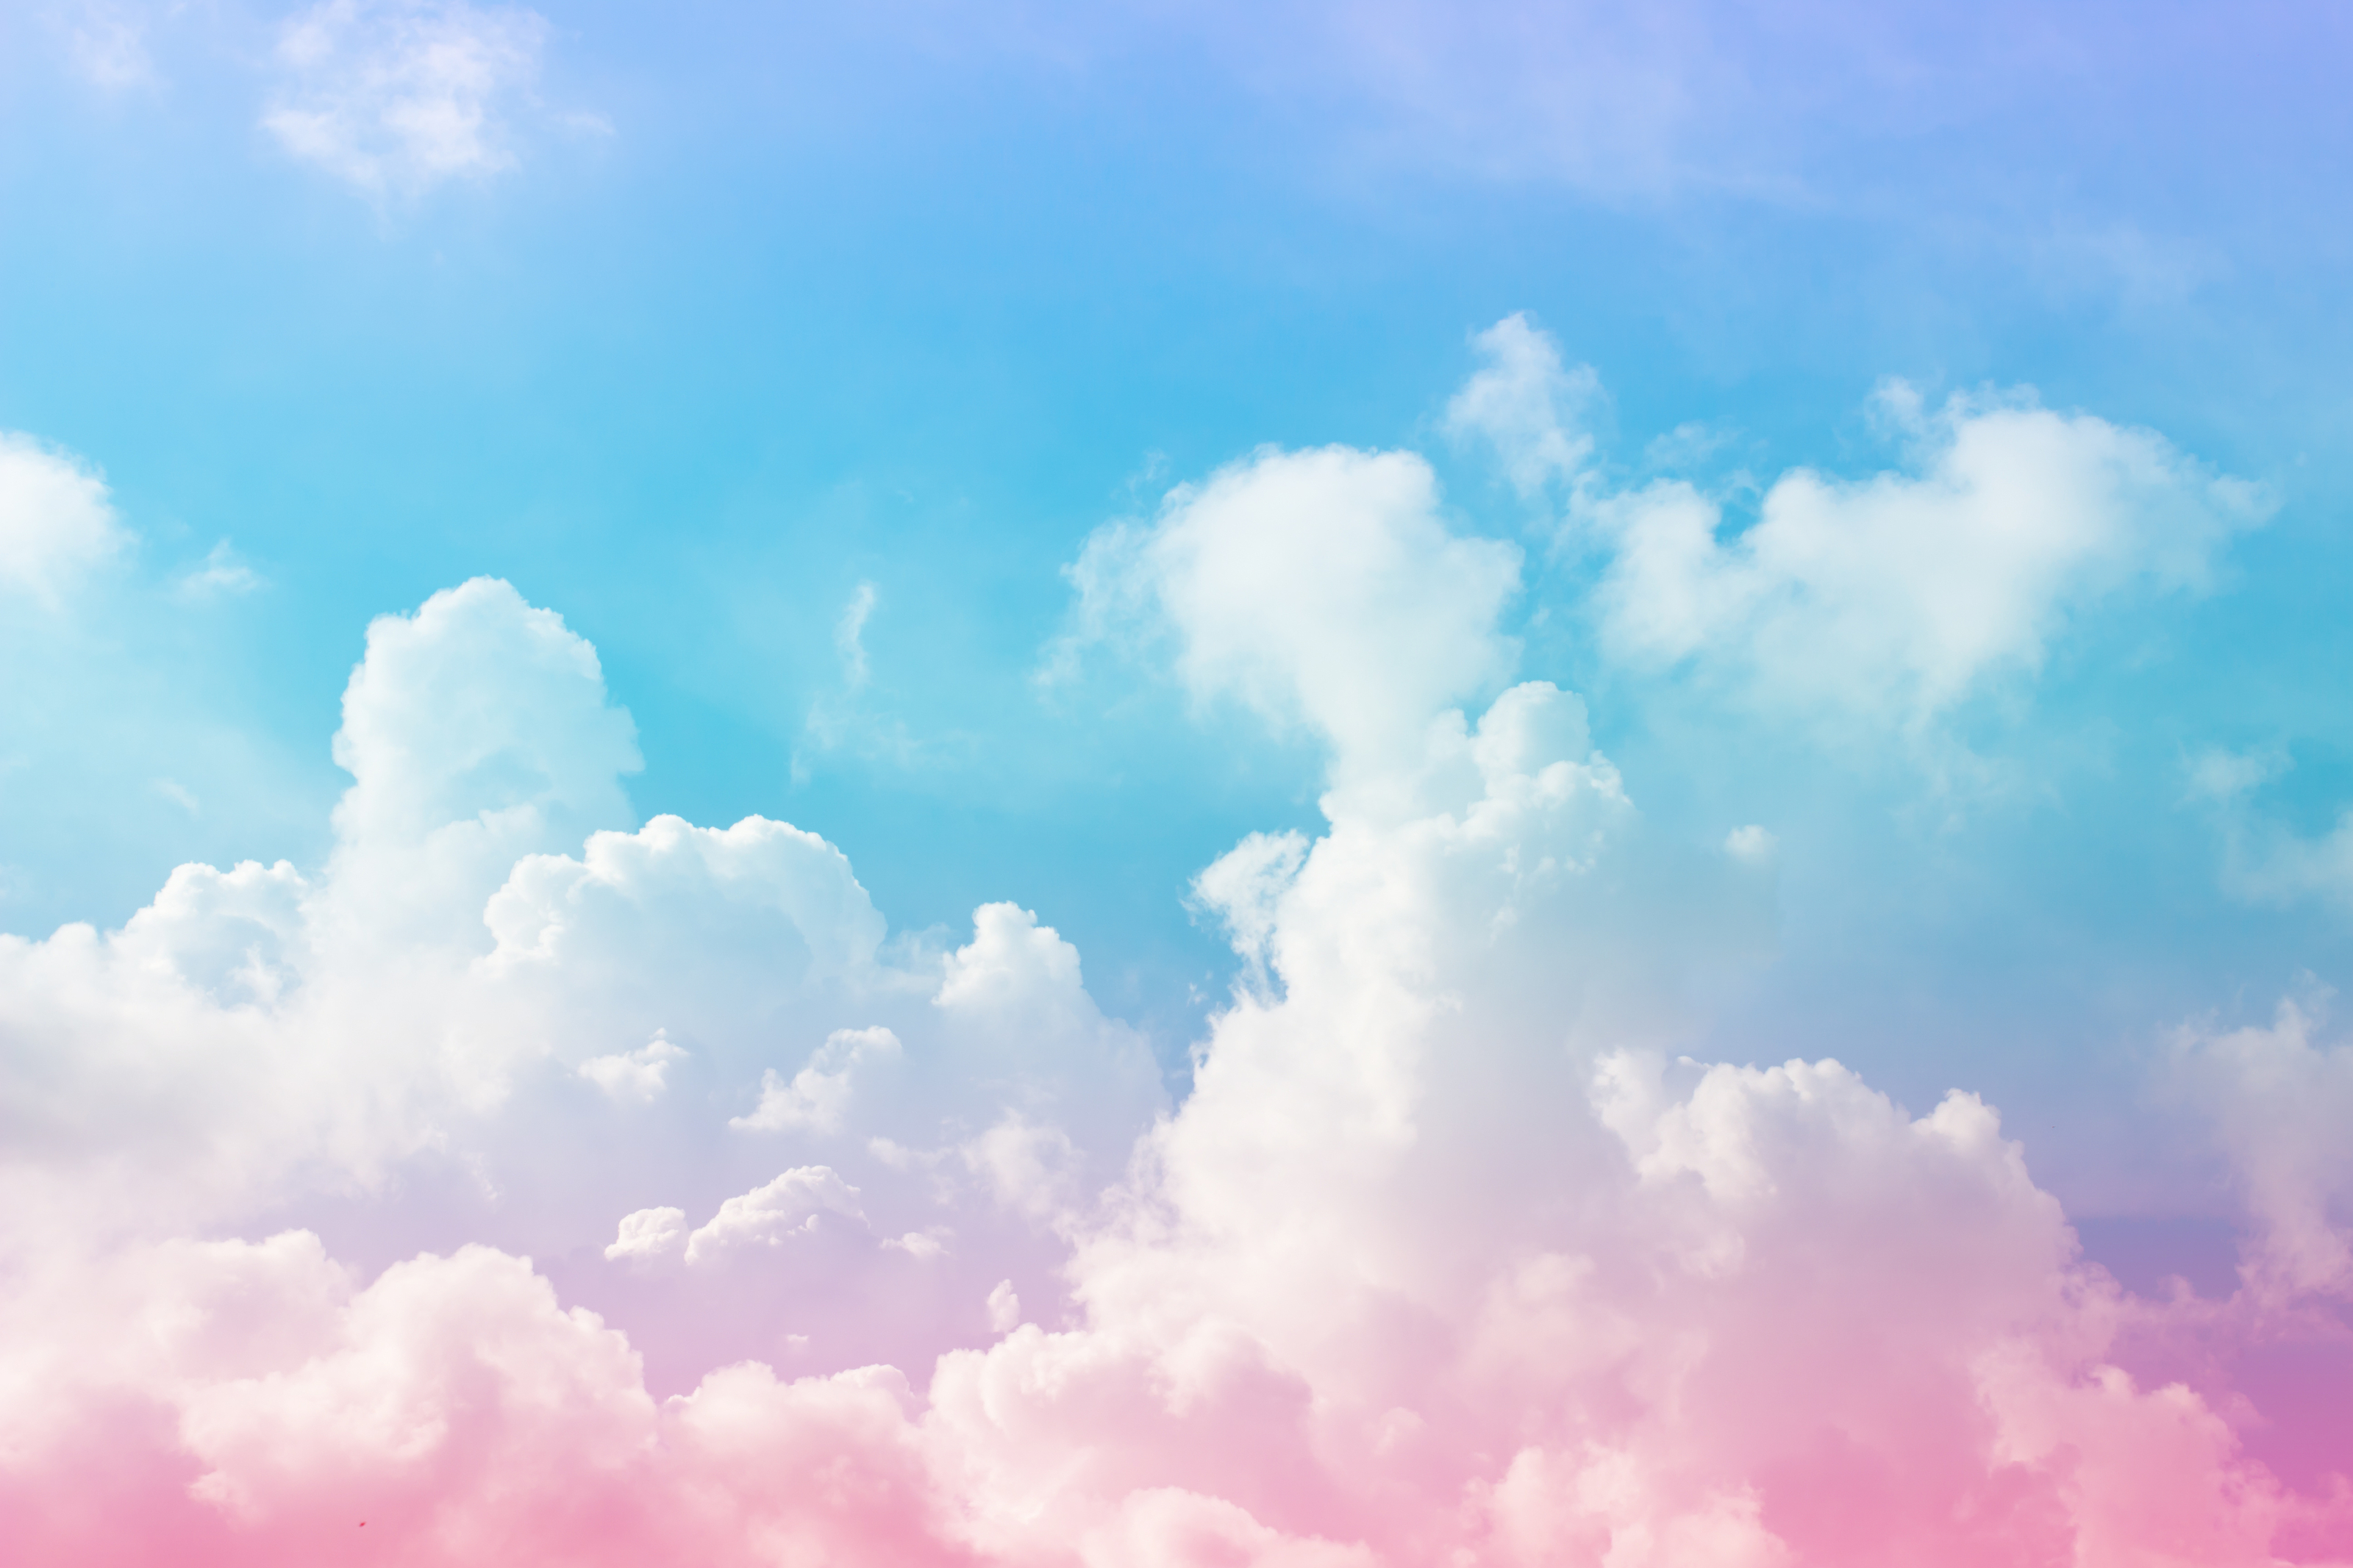 100+] Heavenly Clouds Wallpapers | Wallpapers.com